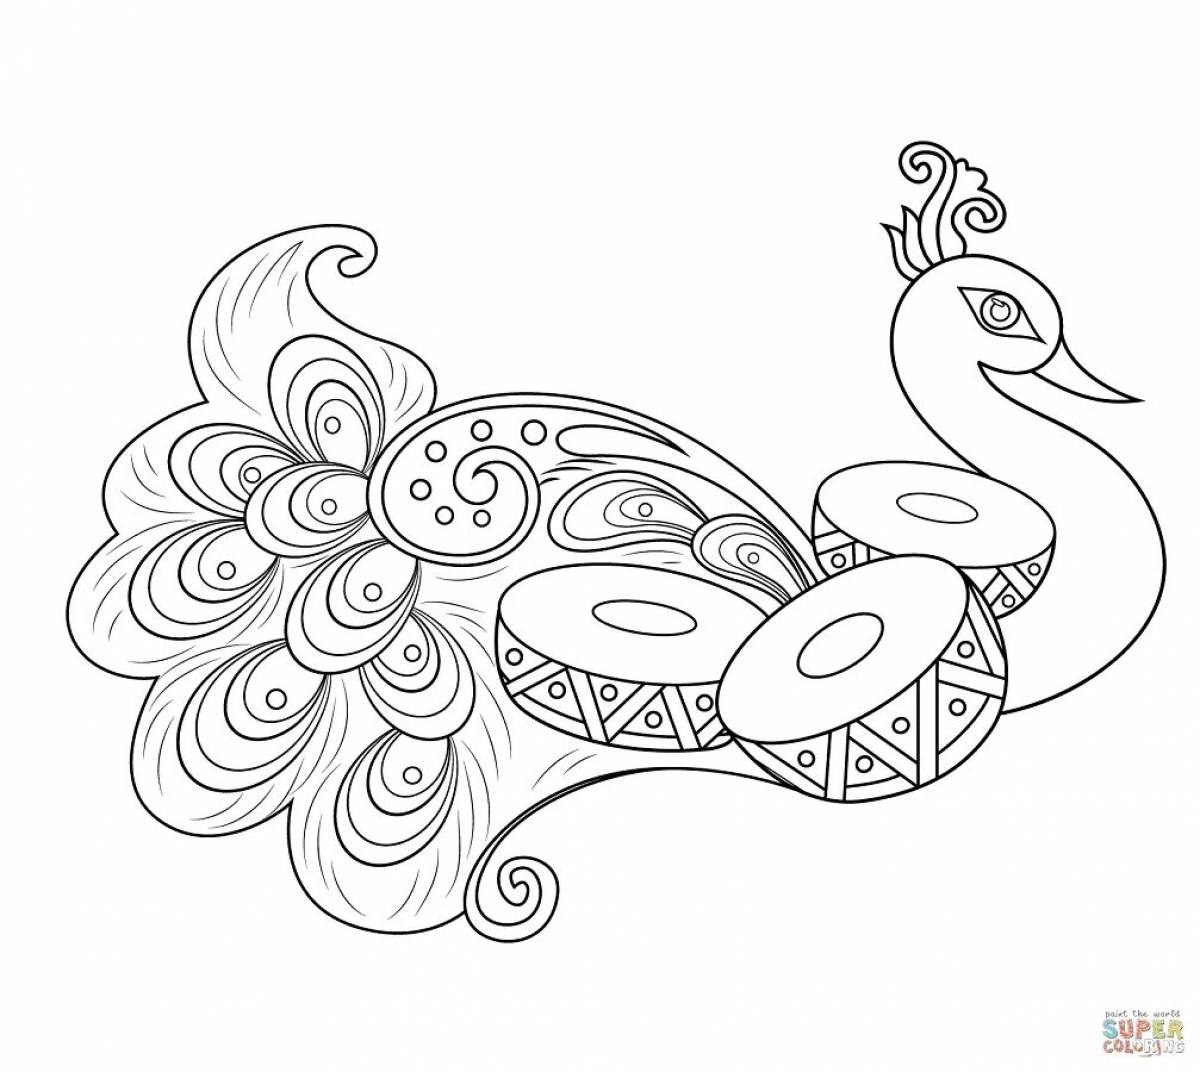 Excellent patterns and ornaments for coloring pages for children